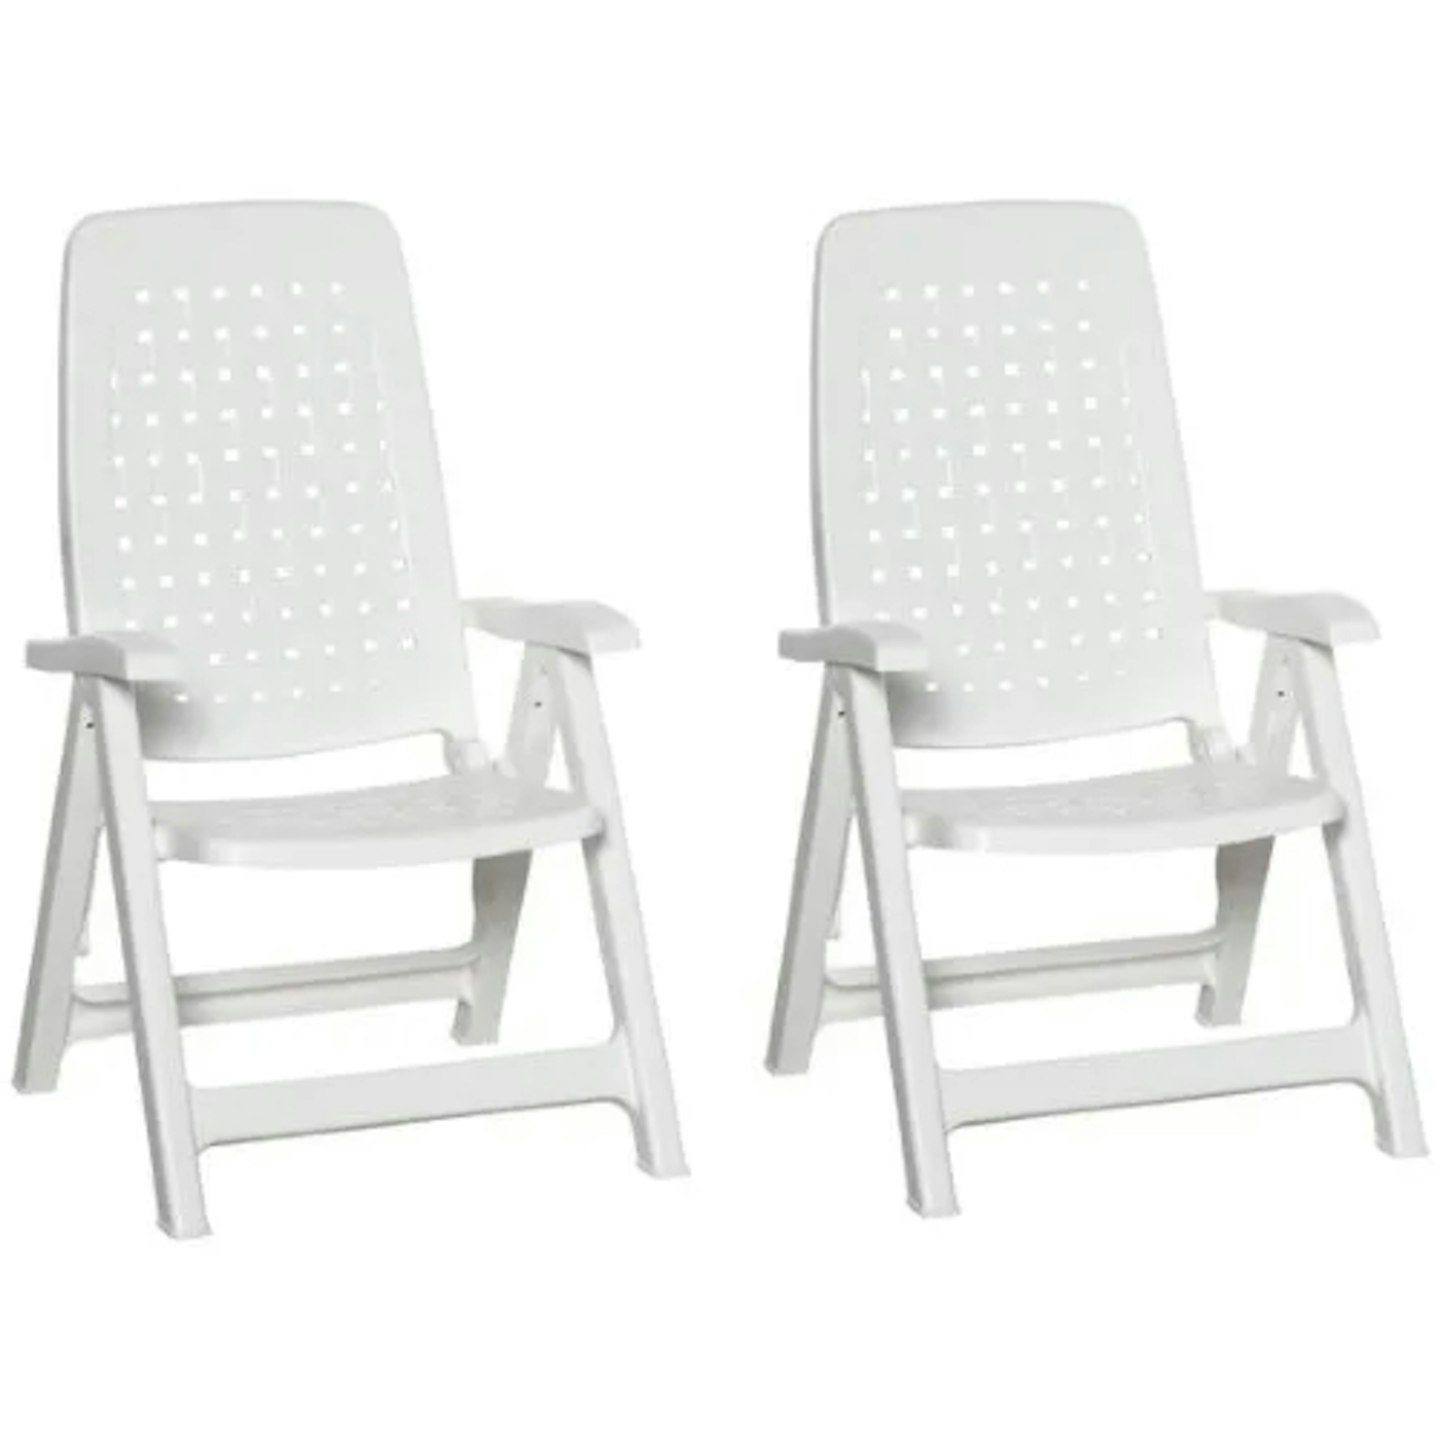 Outsunny plastic garden chairs 